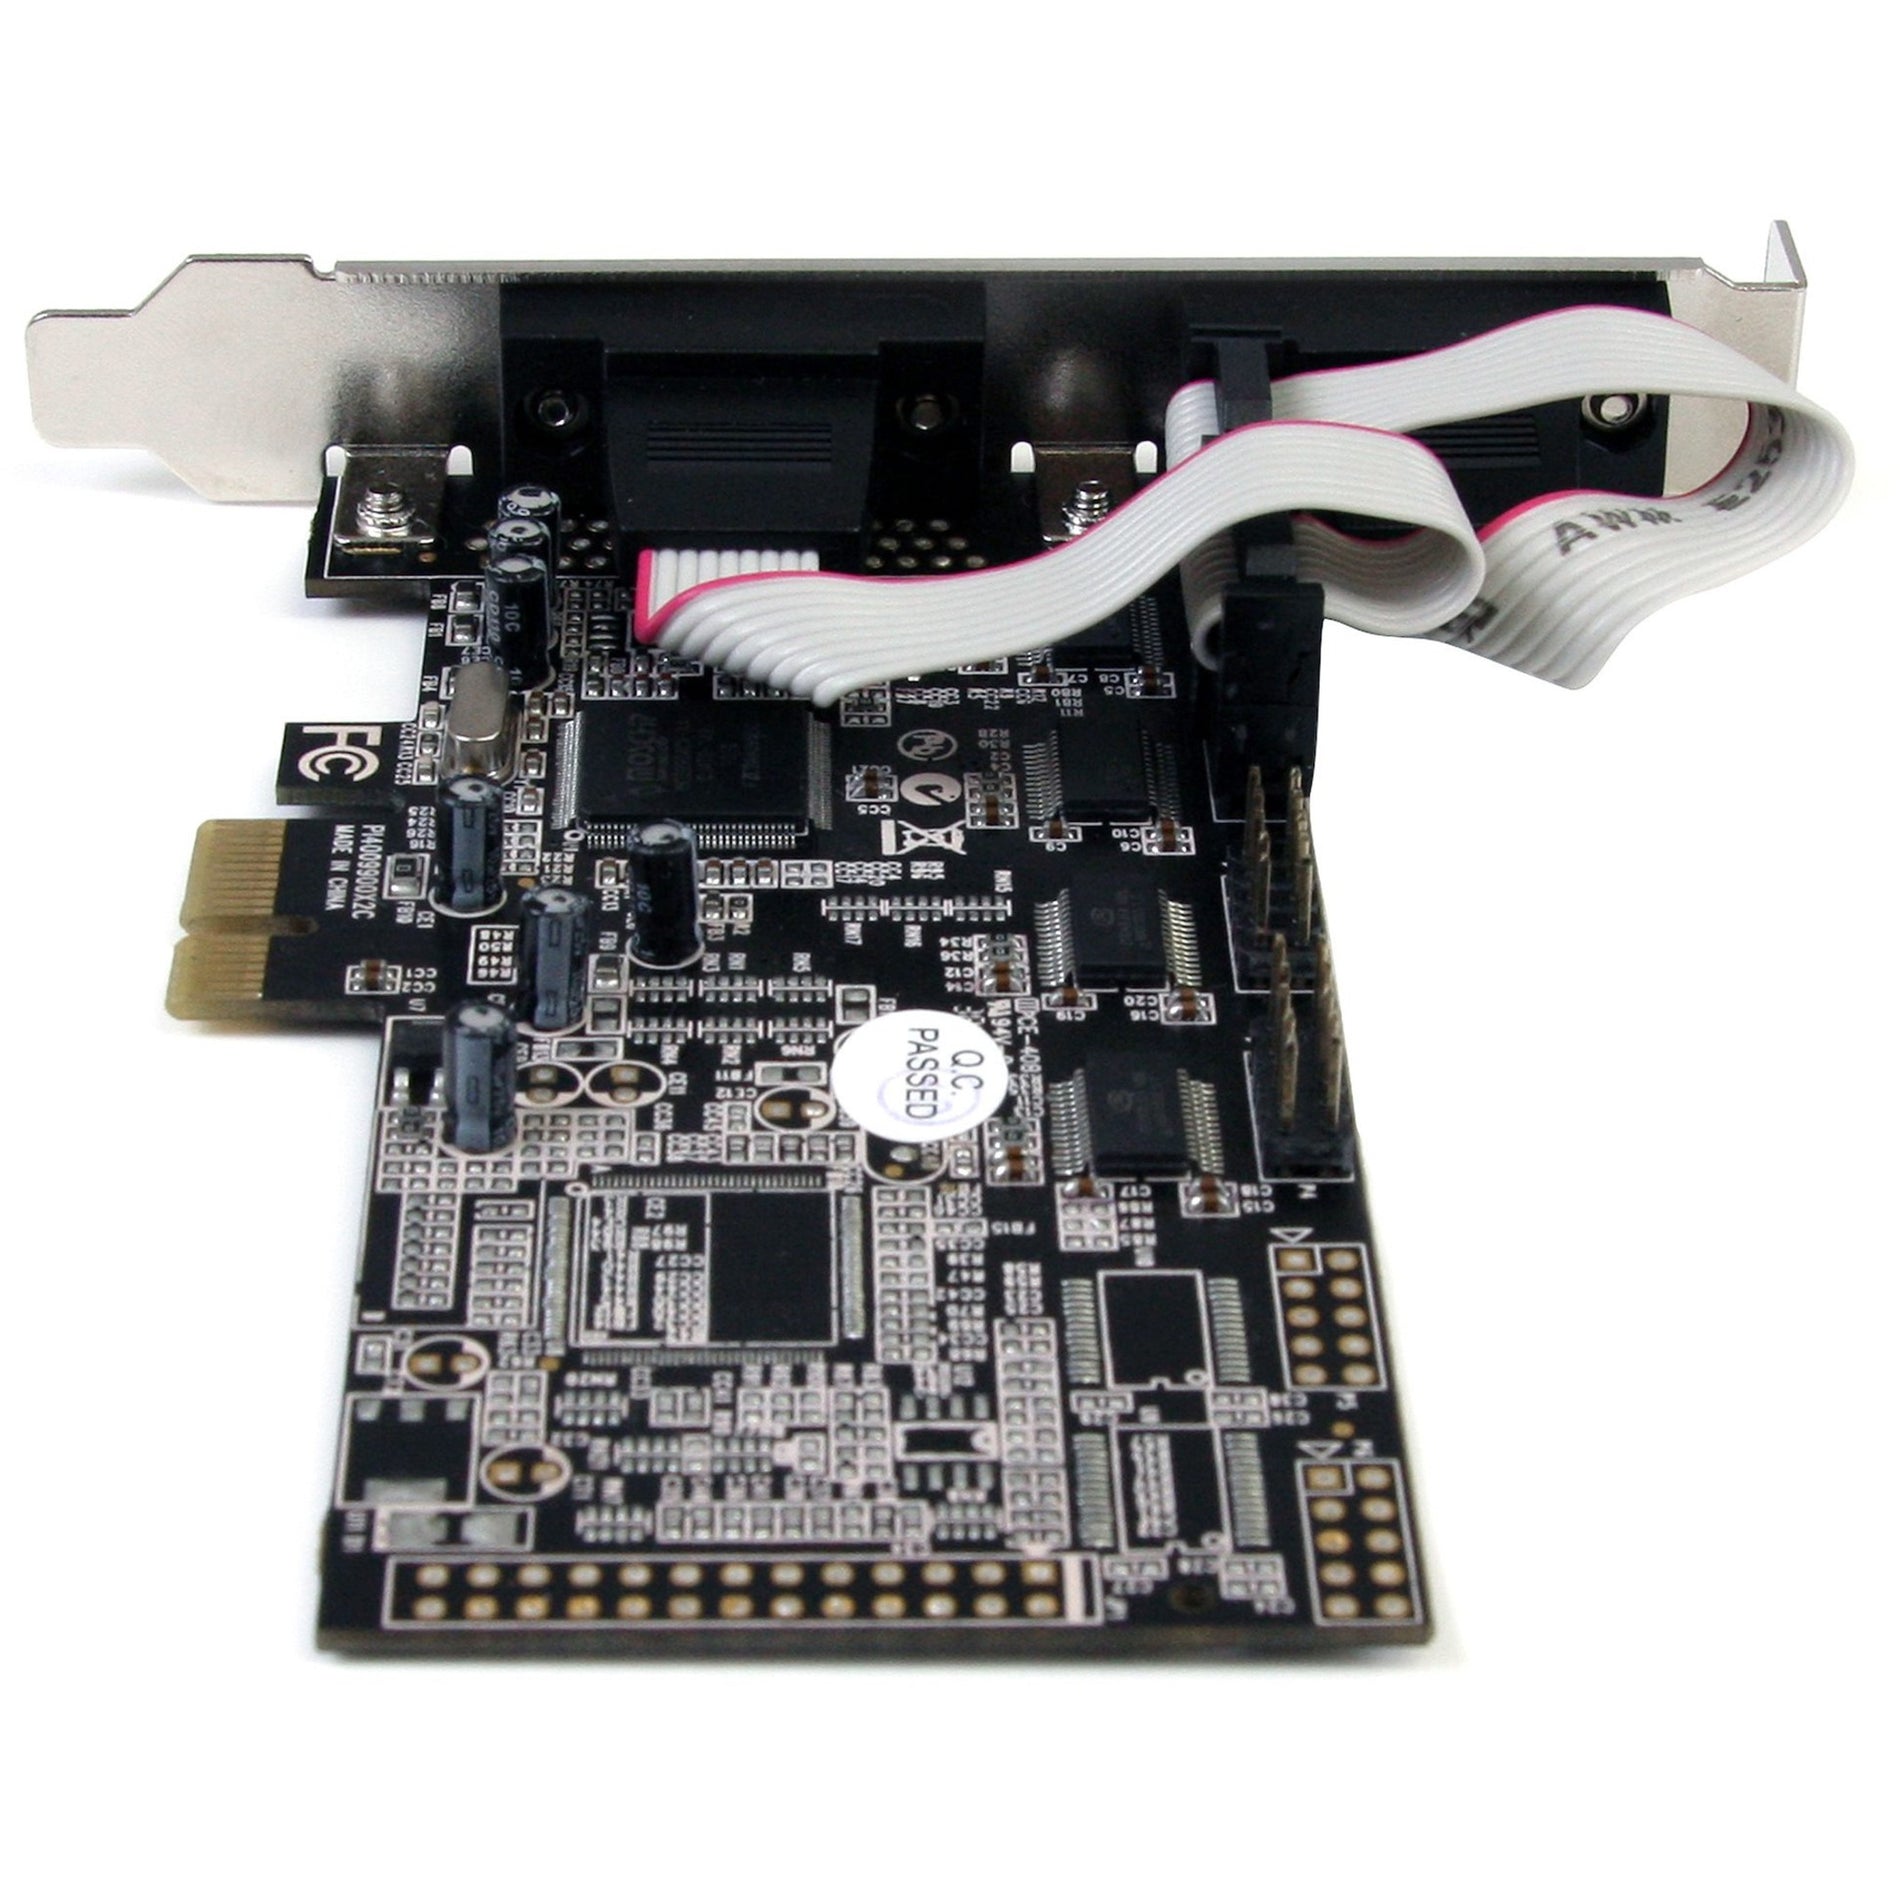 StarTech.com PEX4S553 4 Port Native PCI Express RS232 Serial Adapter Card with 16550 UART, High-Speed Data Transfer for PC